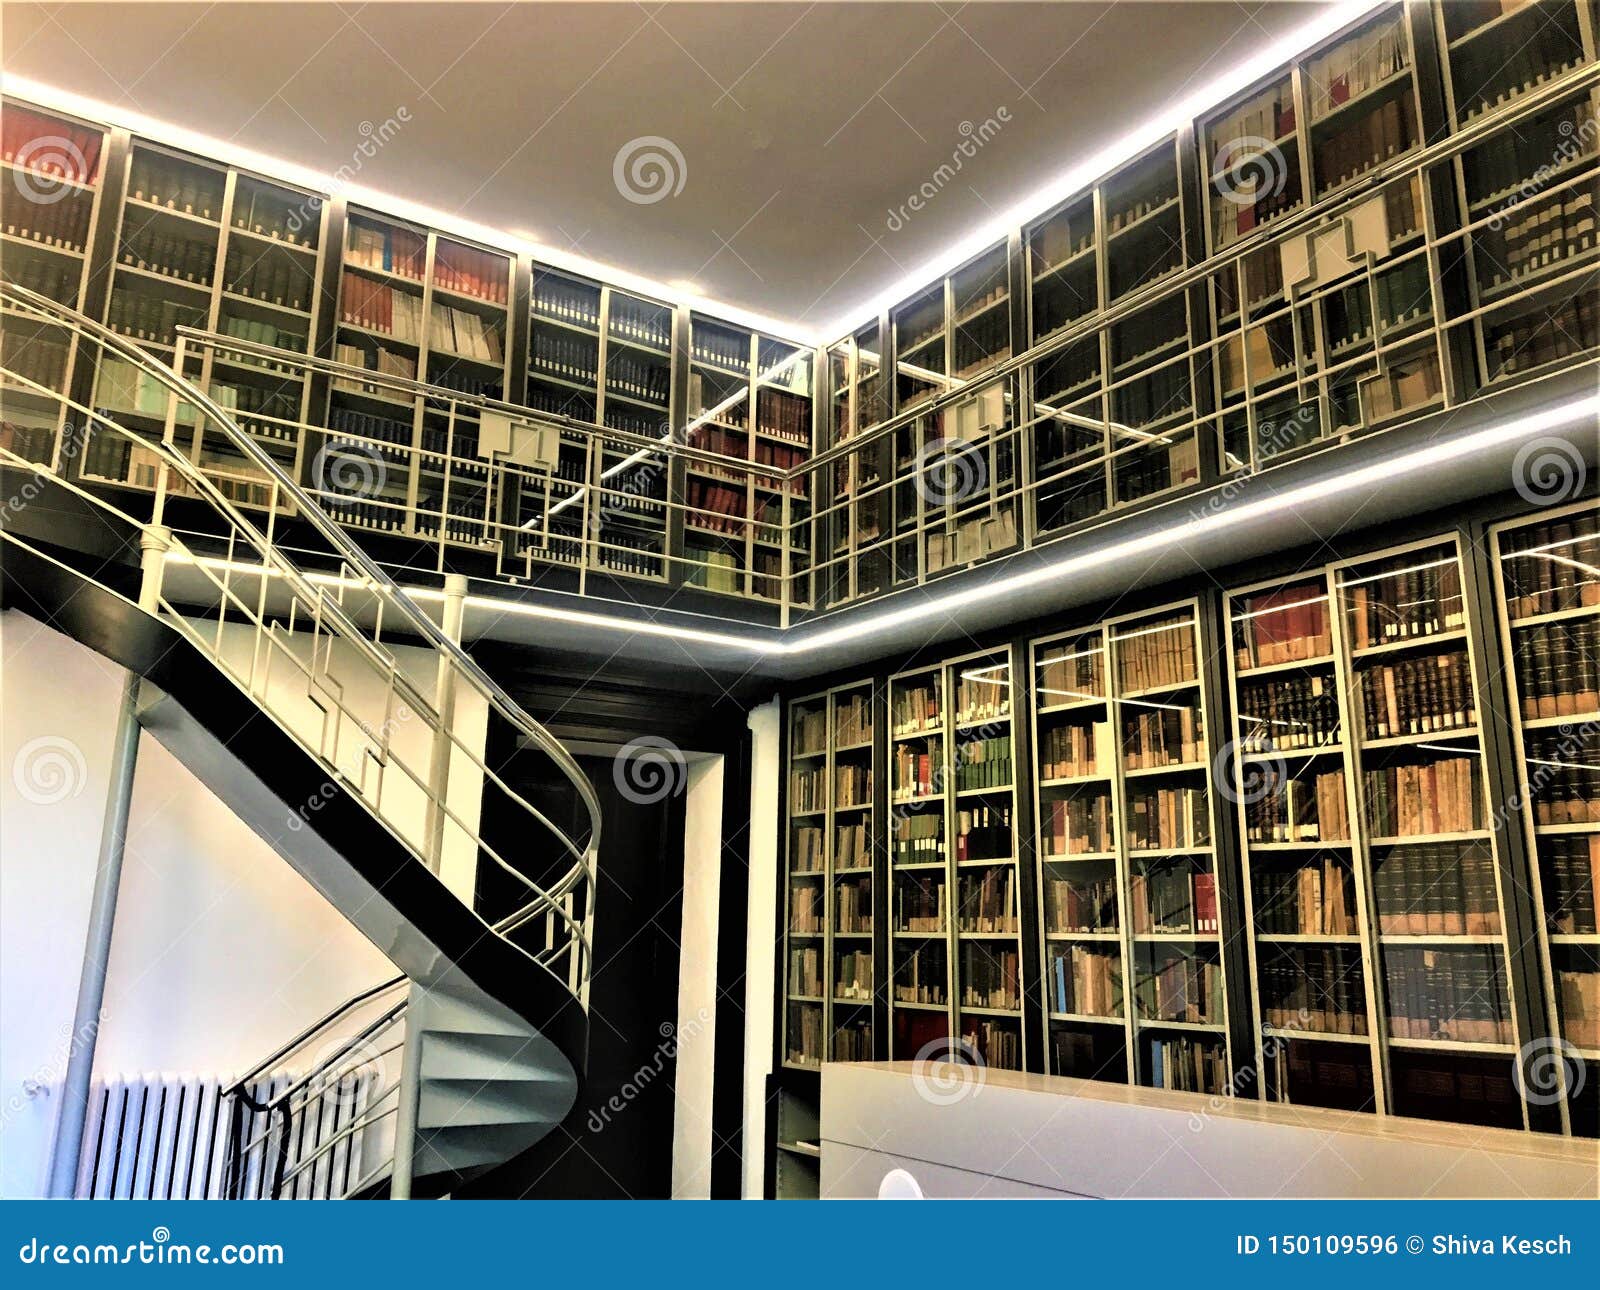 the istituto nazionale di ricerca metrologica inrim in turin city, italy. architecture, history, knowledge, books and art